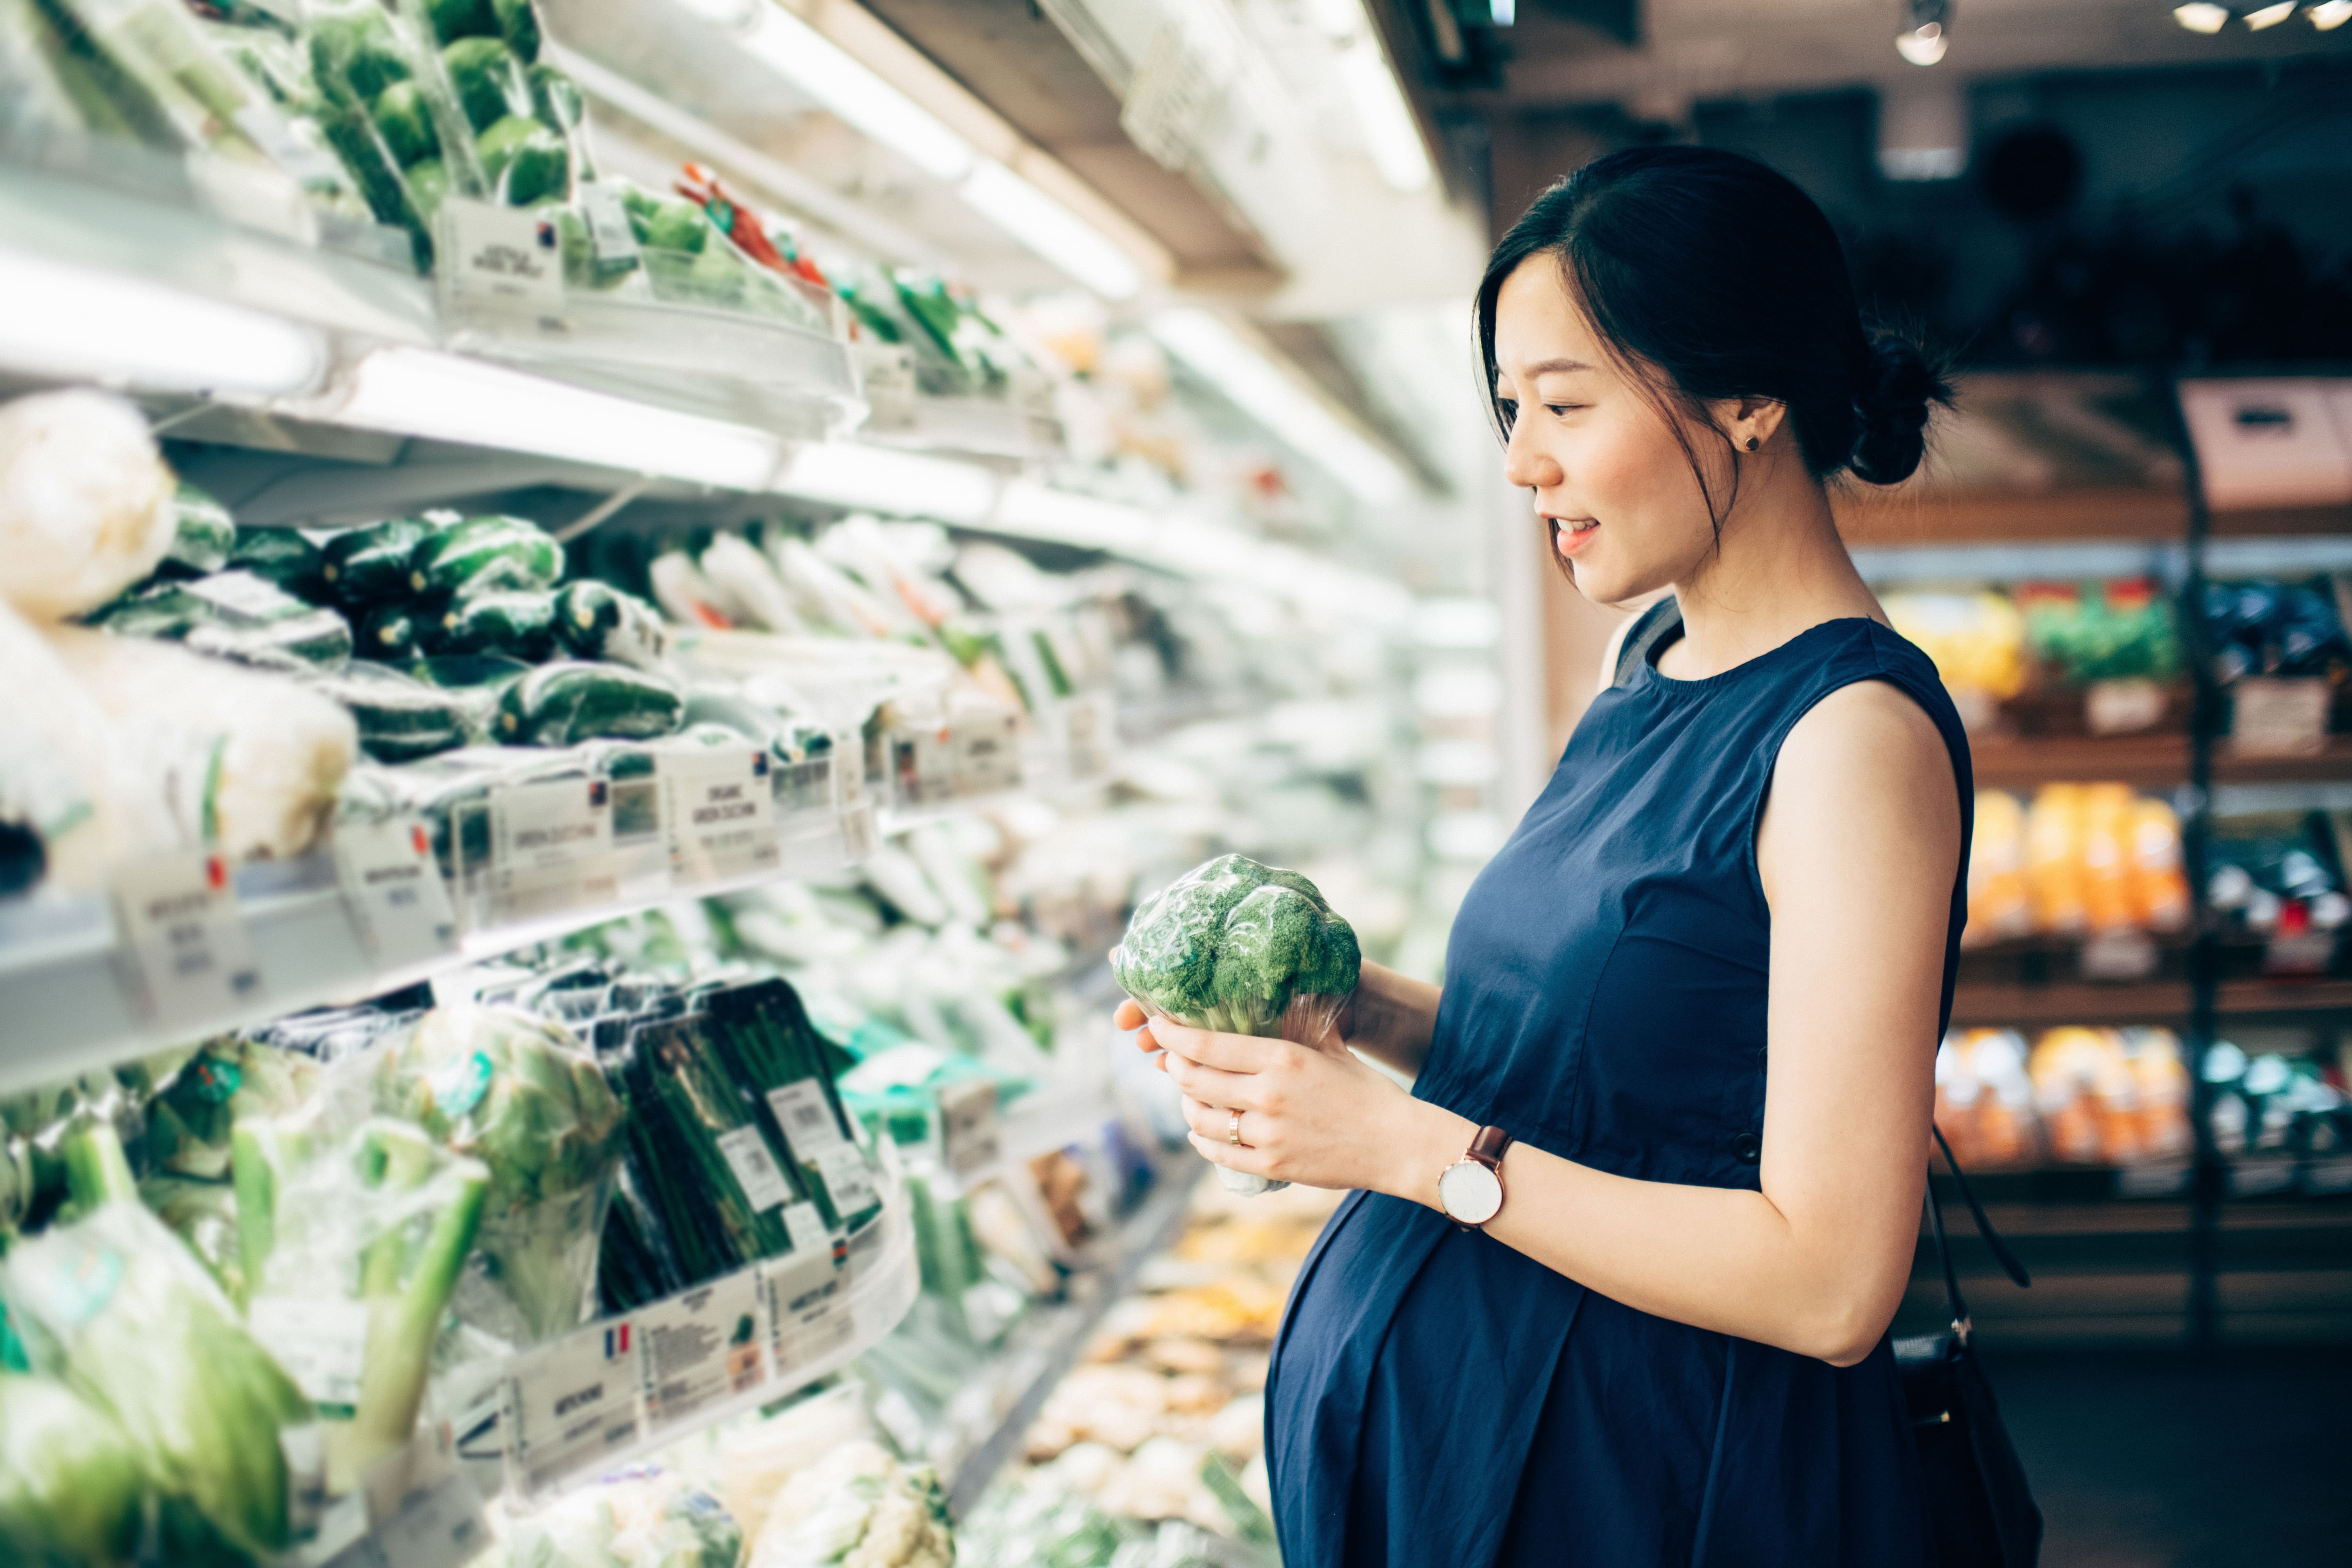 Pregnant woman grocery shopping and looking at the vegetable aisle in a supermarket 